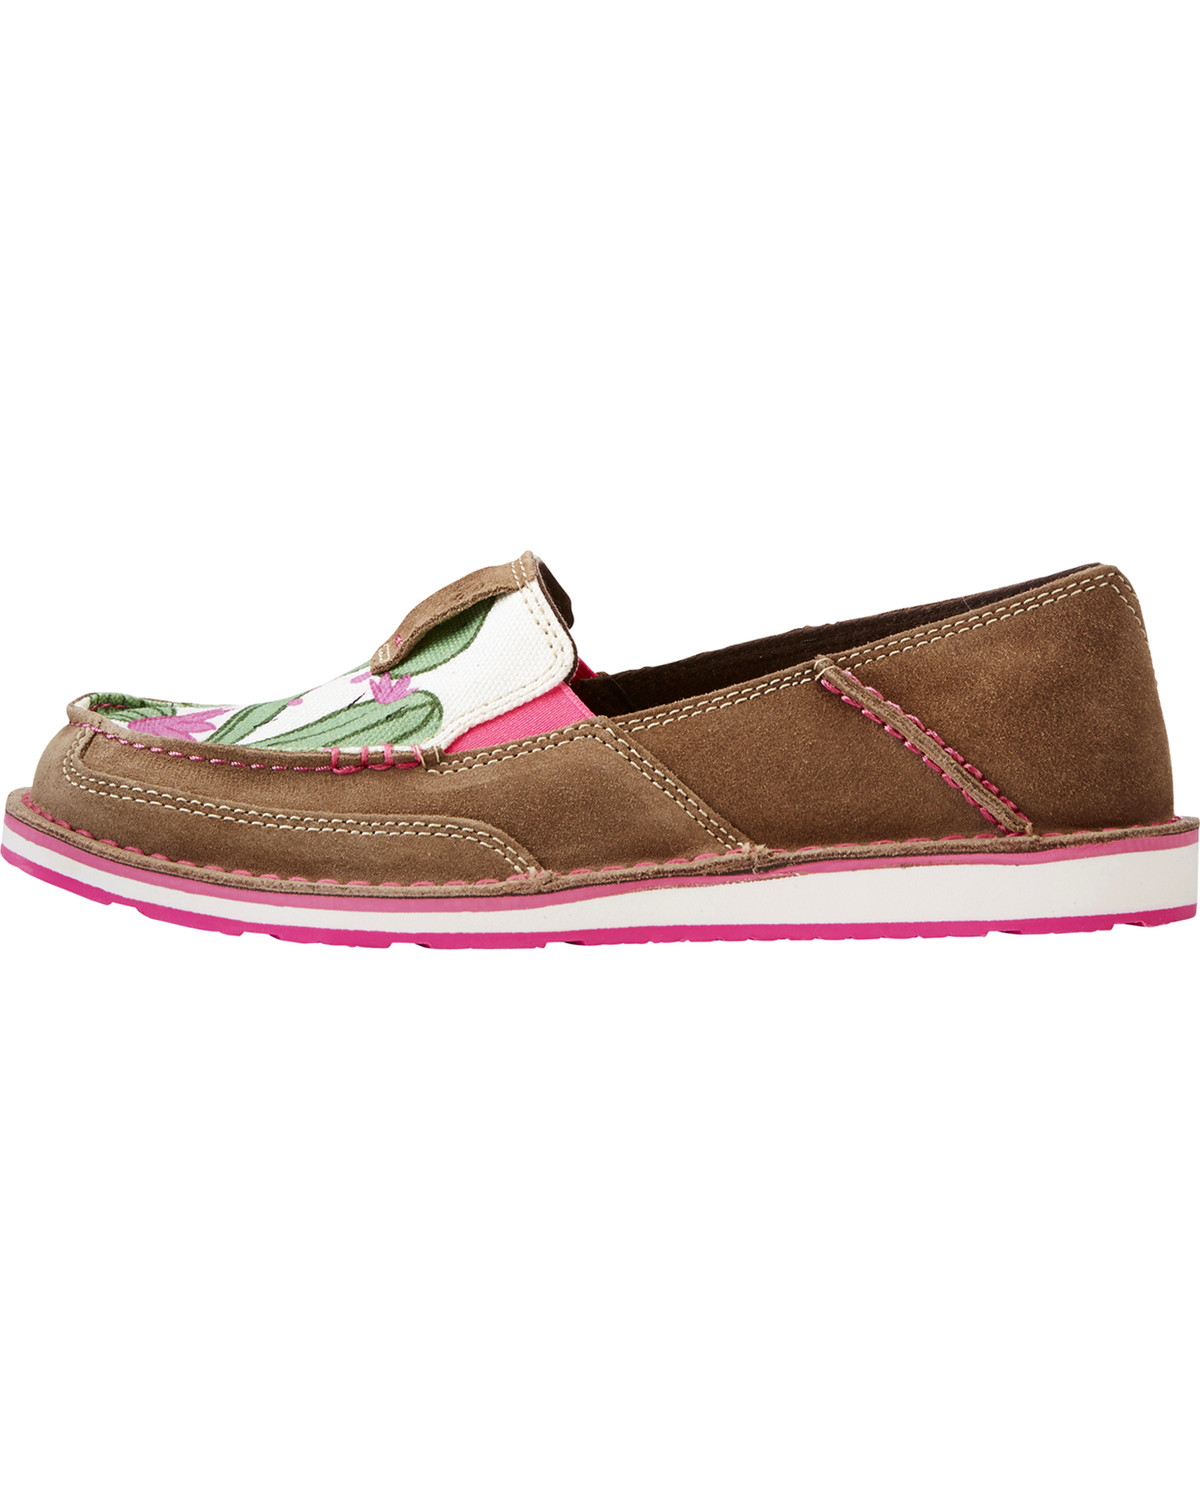 Ariat Women's Cactus Flower Slip On Cruiser Shoes - Country Outfitter